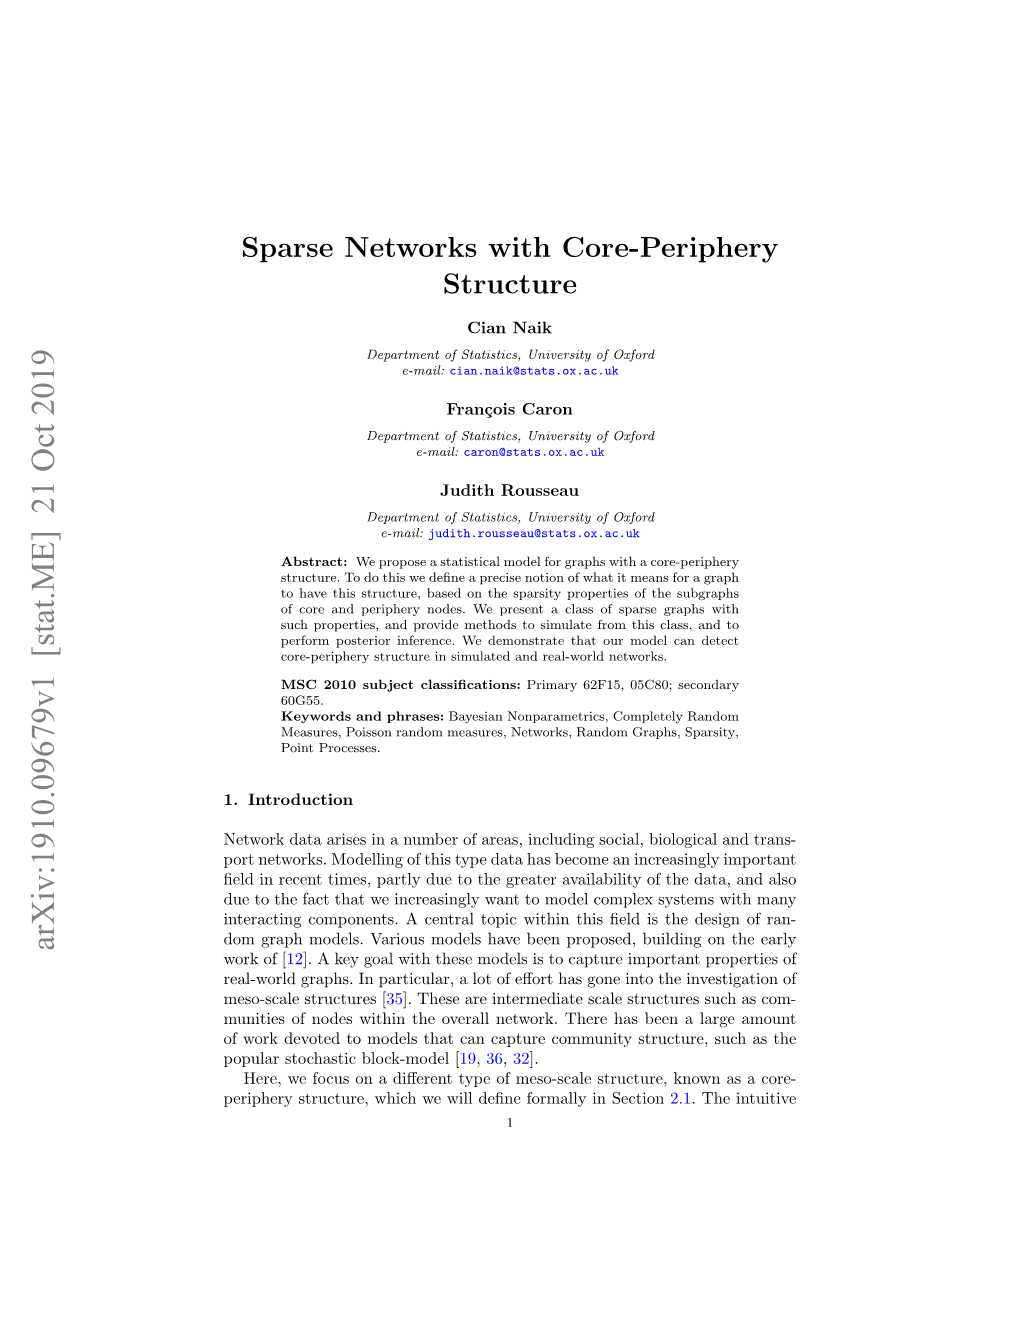 Sparse Networks with Core-Periphery Structure